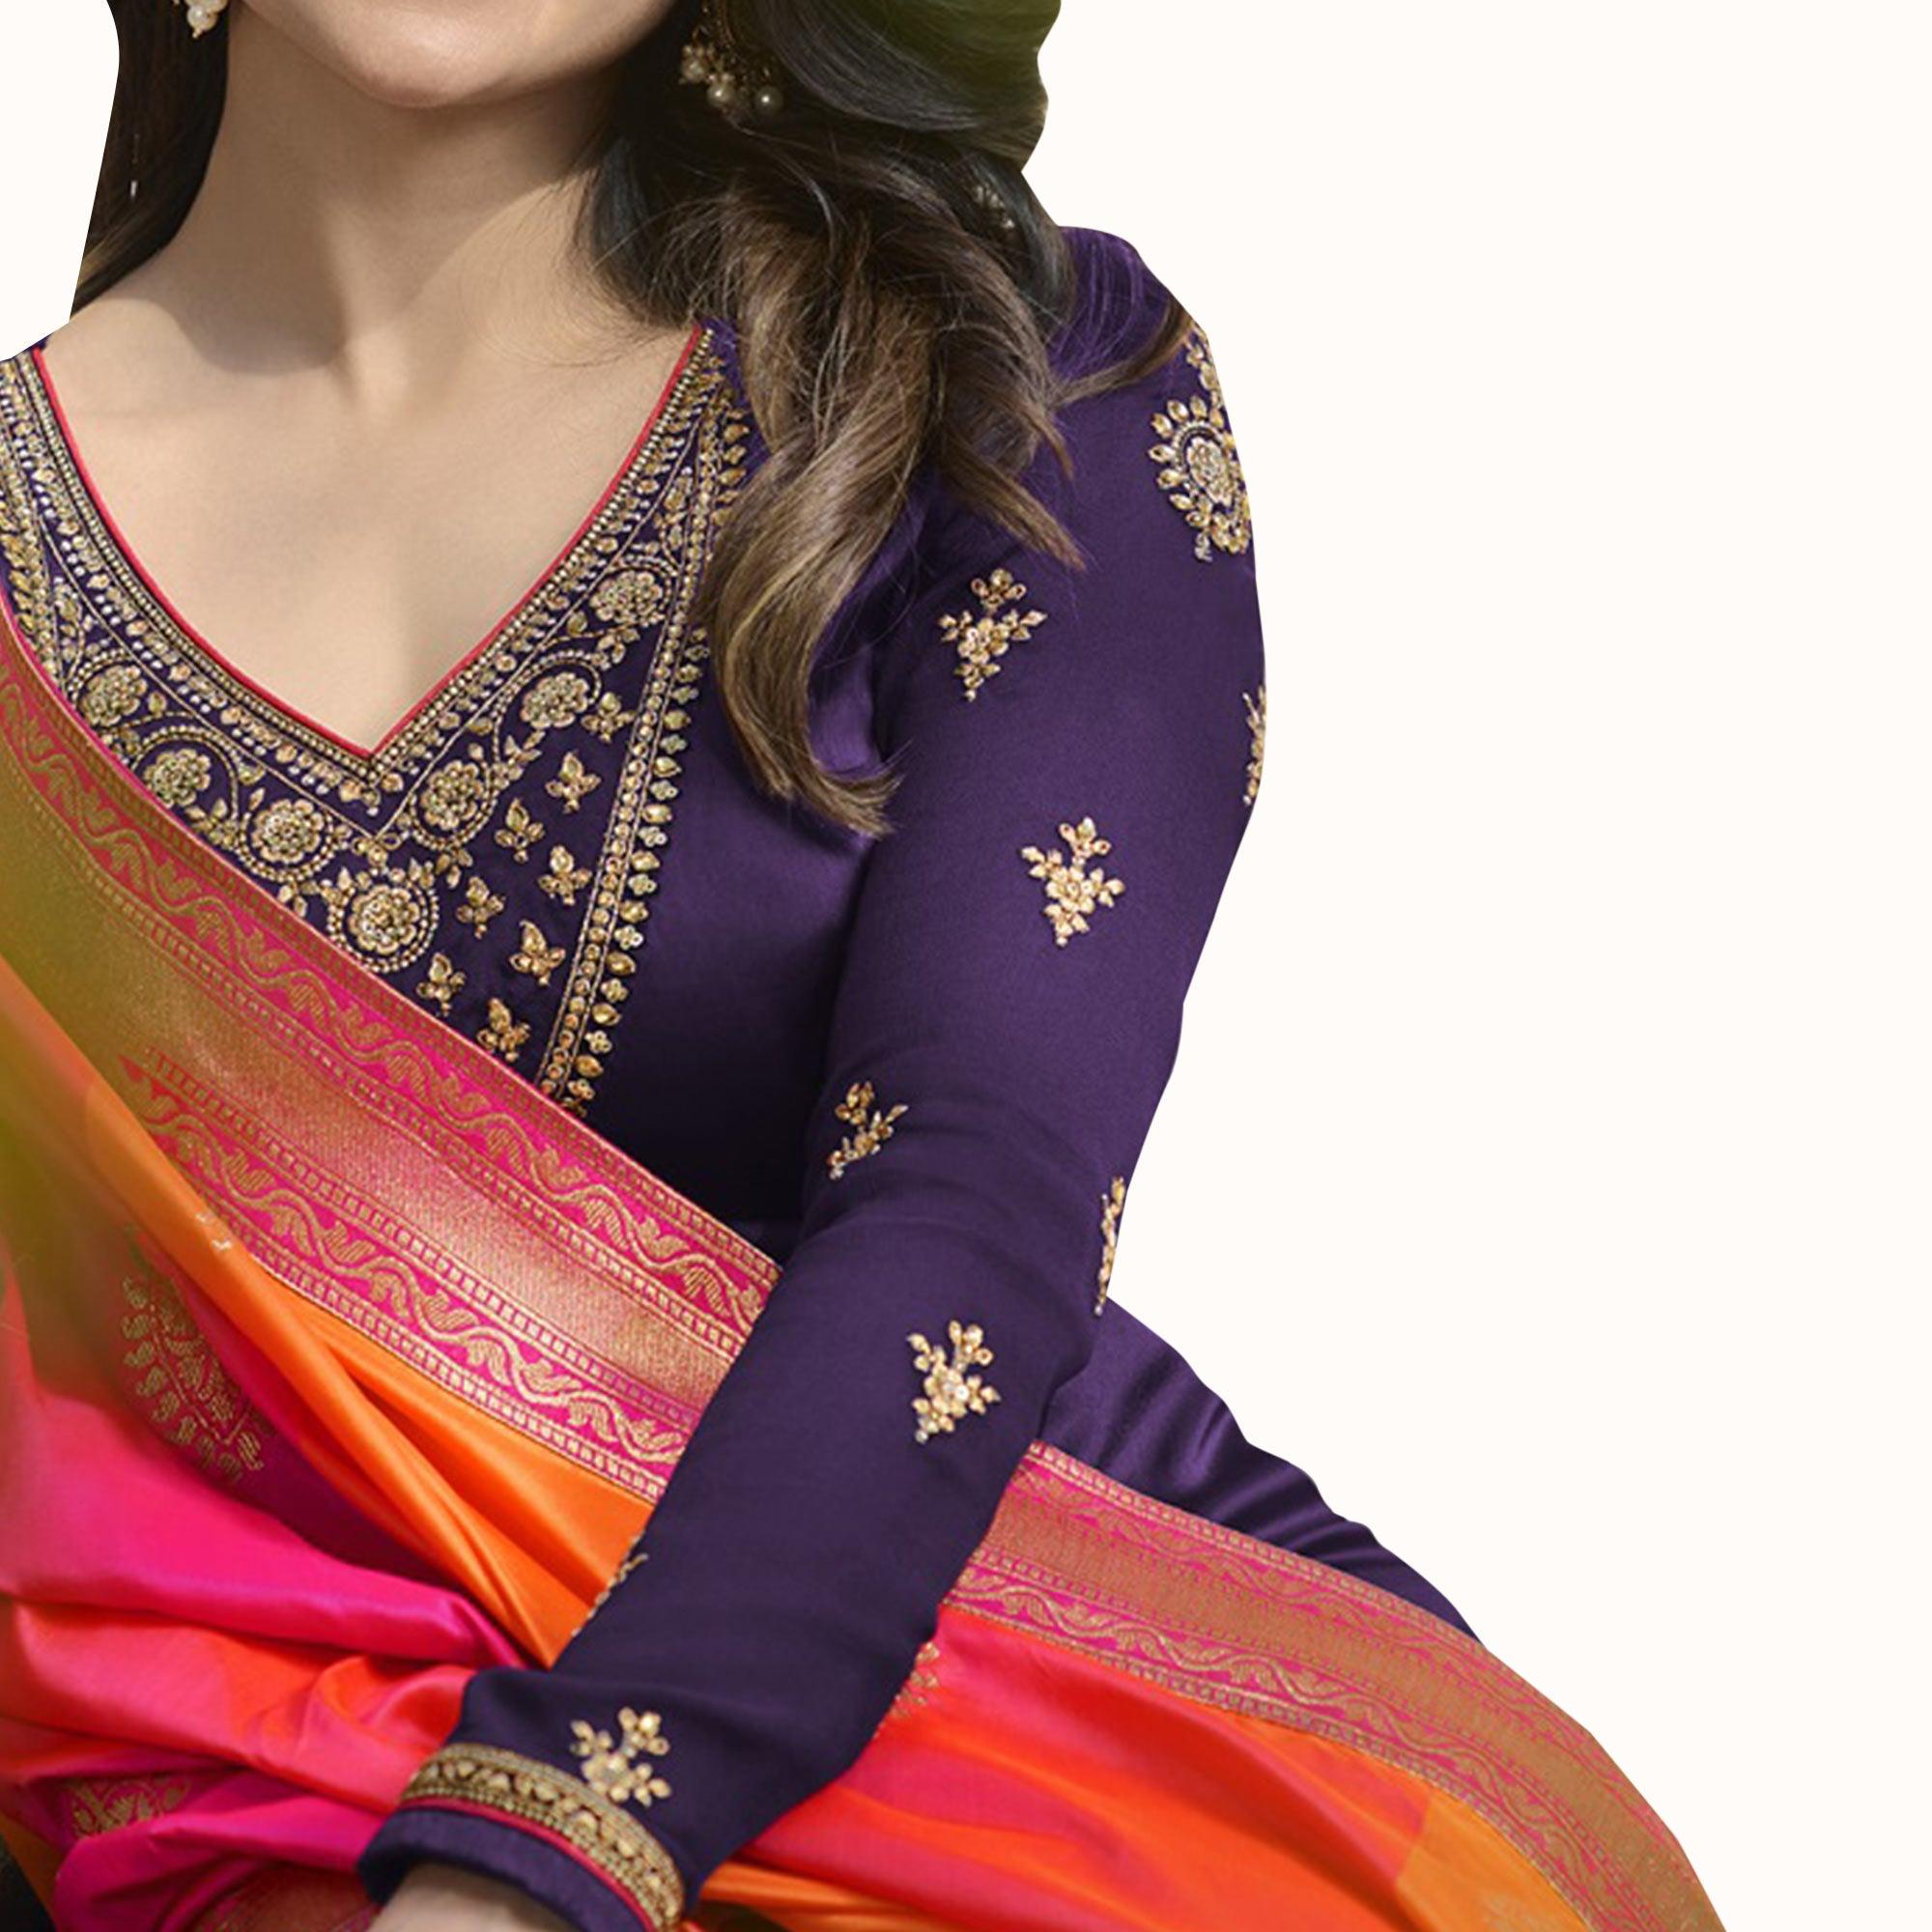 Demanding Purple Colored Party Wear Embroidered Georgette Suit - Peachmode